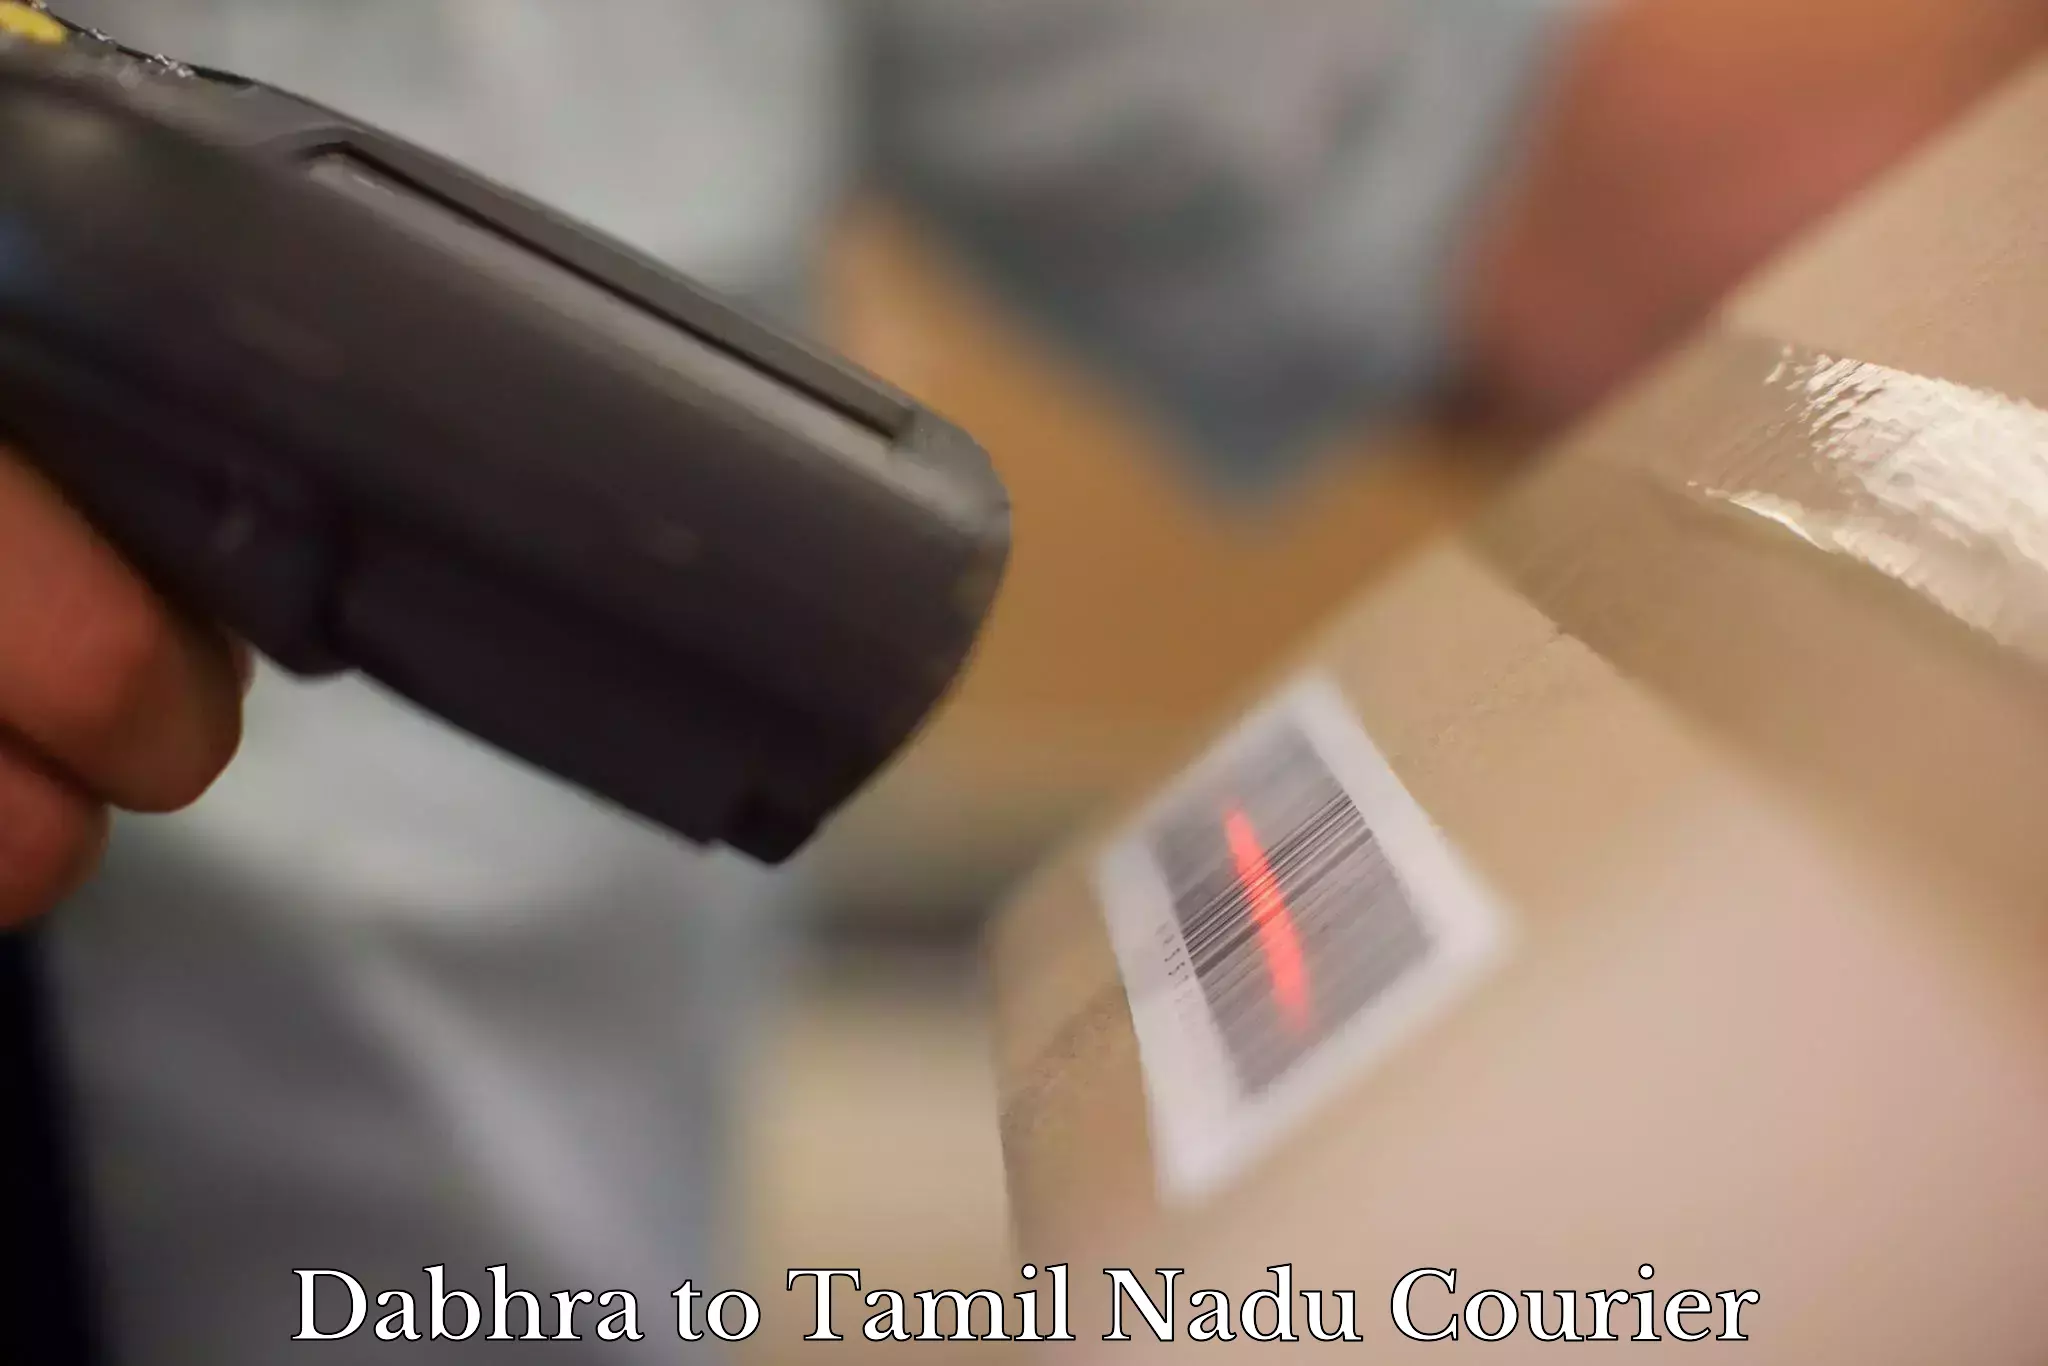 Furniture delivery service Dabhra to Thondi